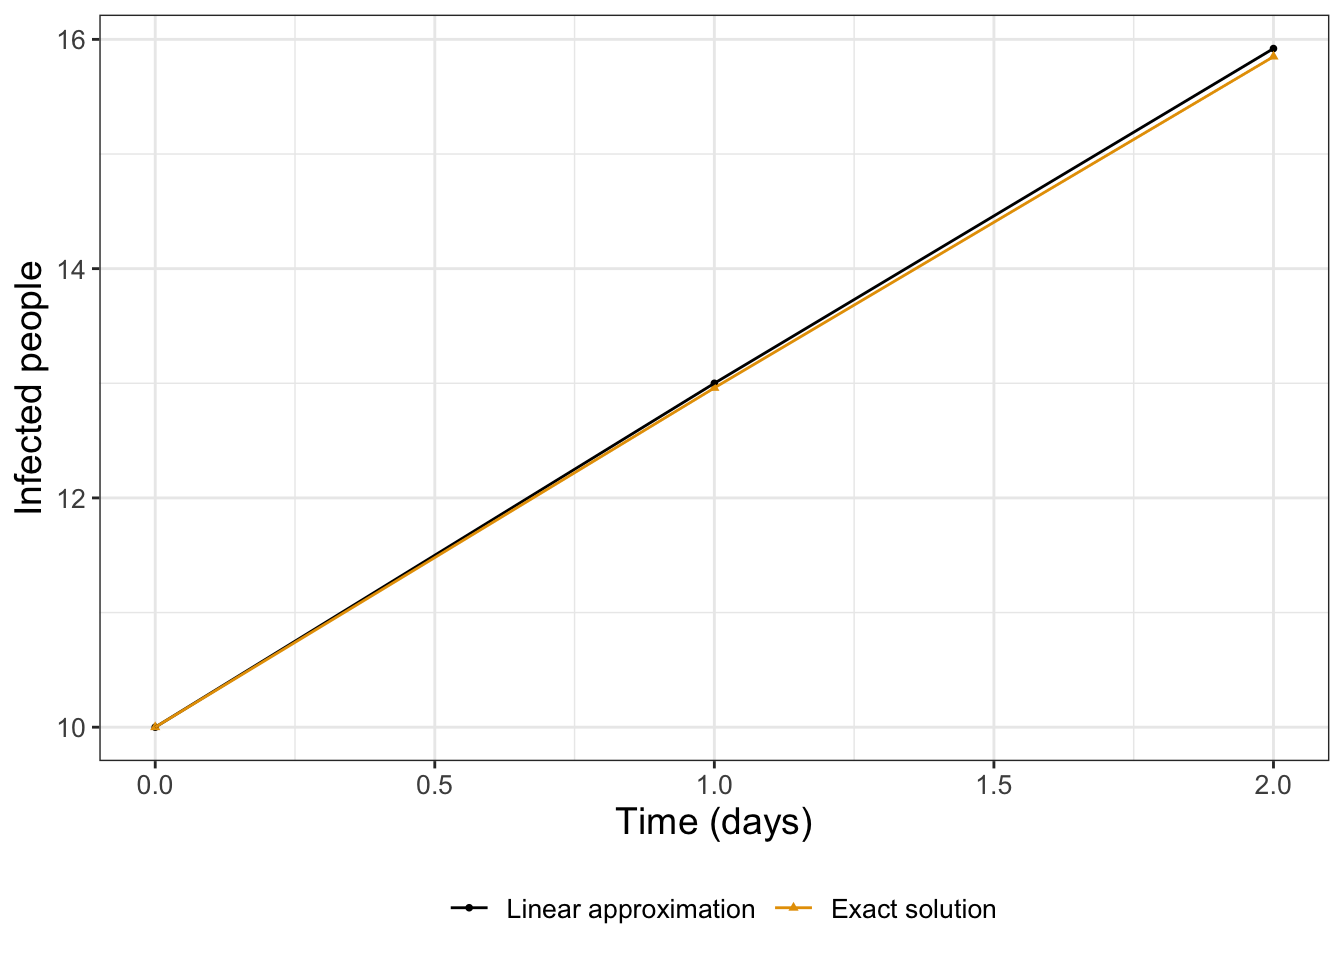 Approximation of a solution to Equation \@ref(eq:flu-model-02) using local linearity.